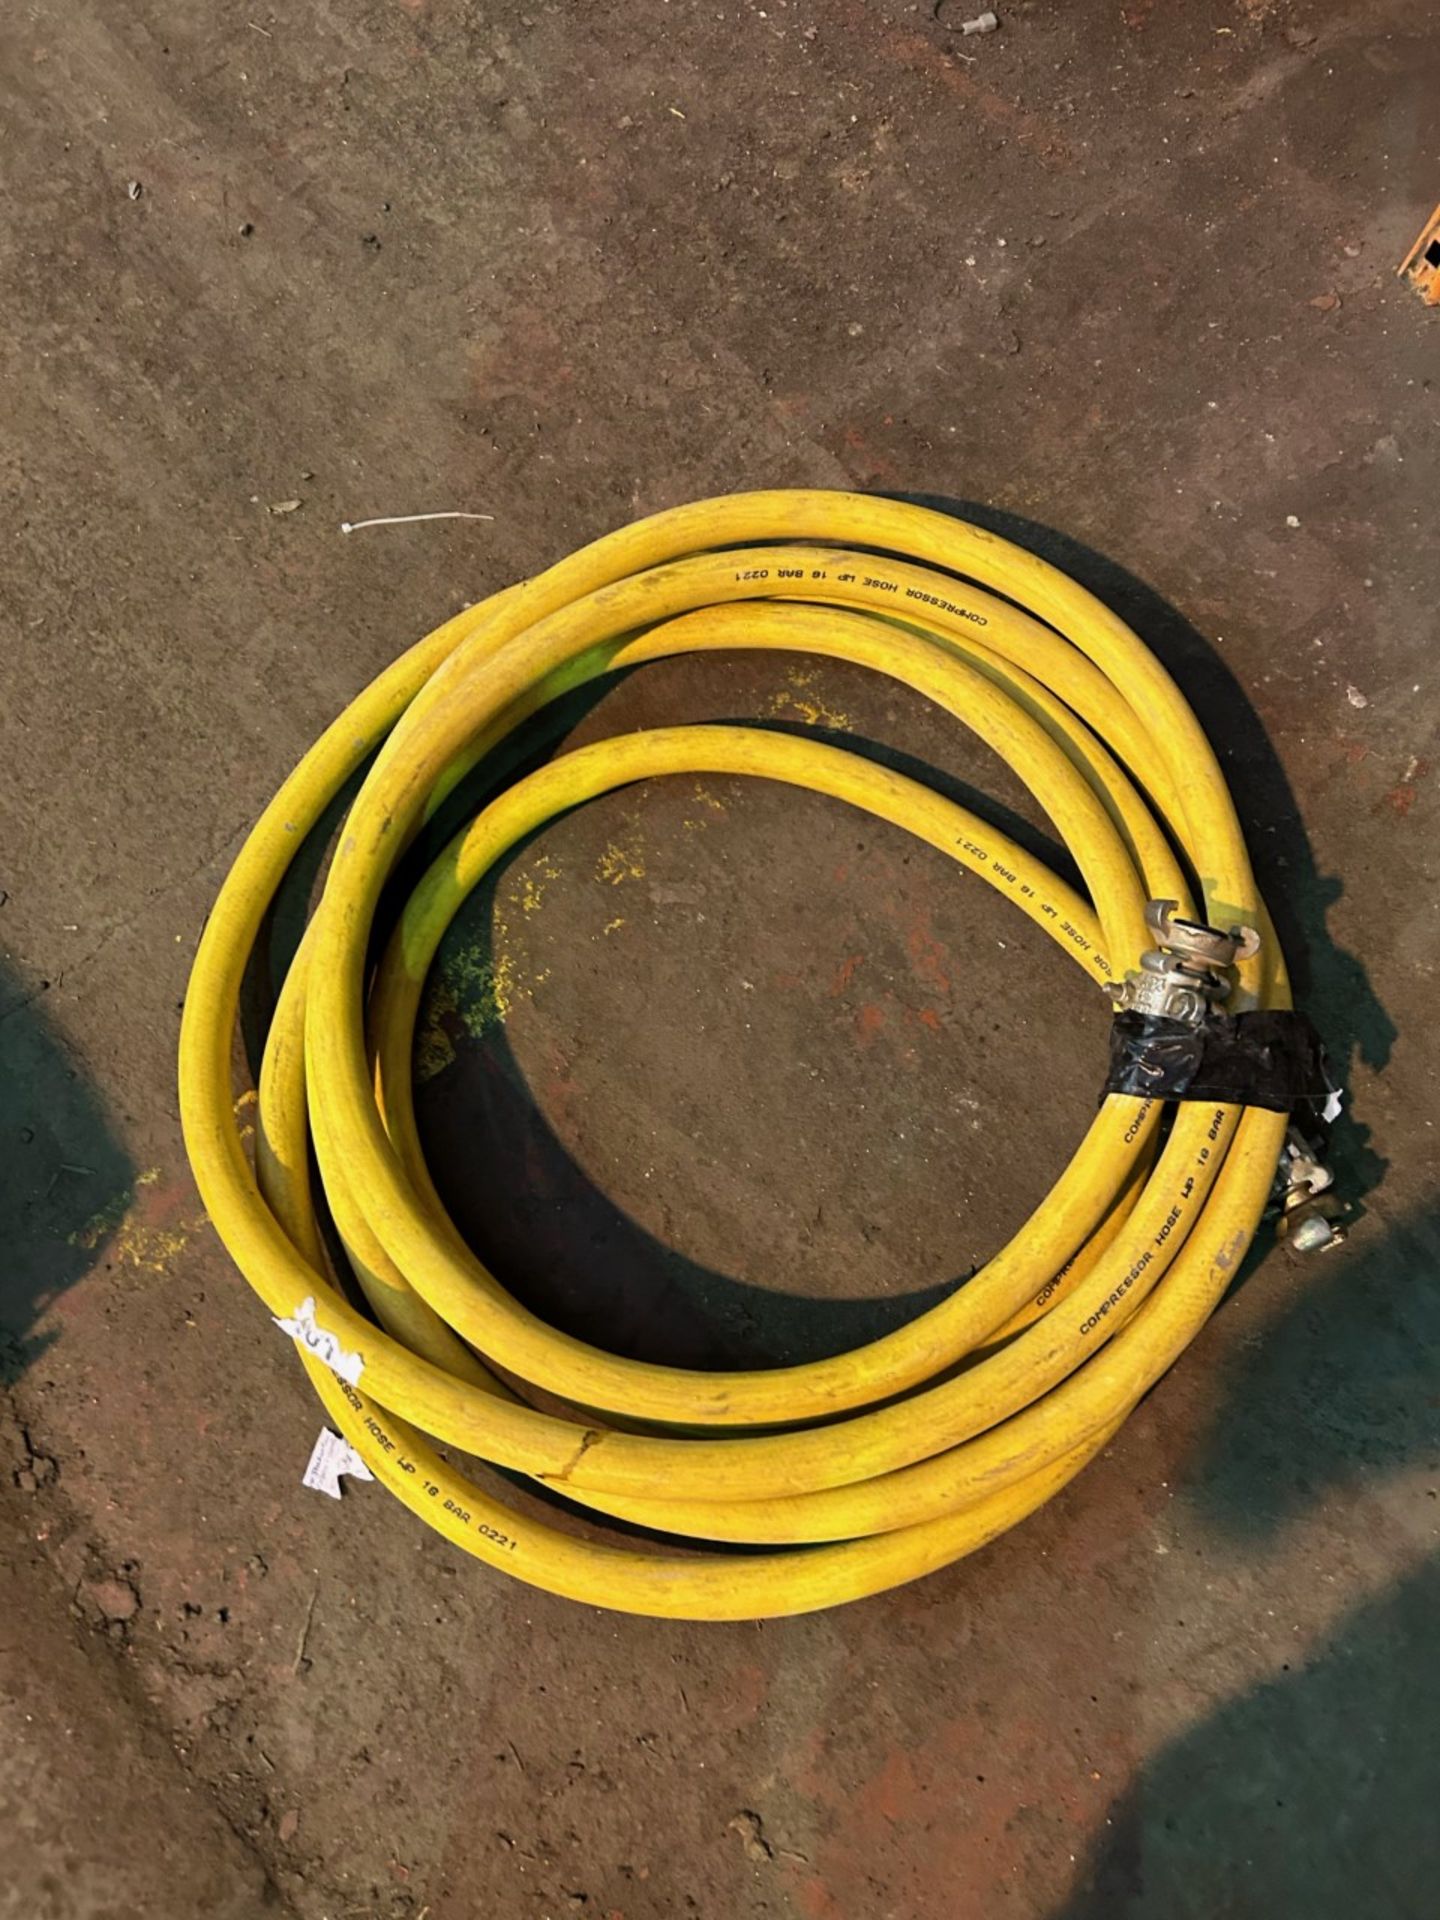 Approximately 5m of 3/4” compressor air hose with couplings